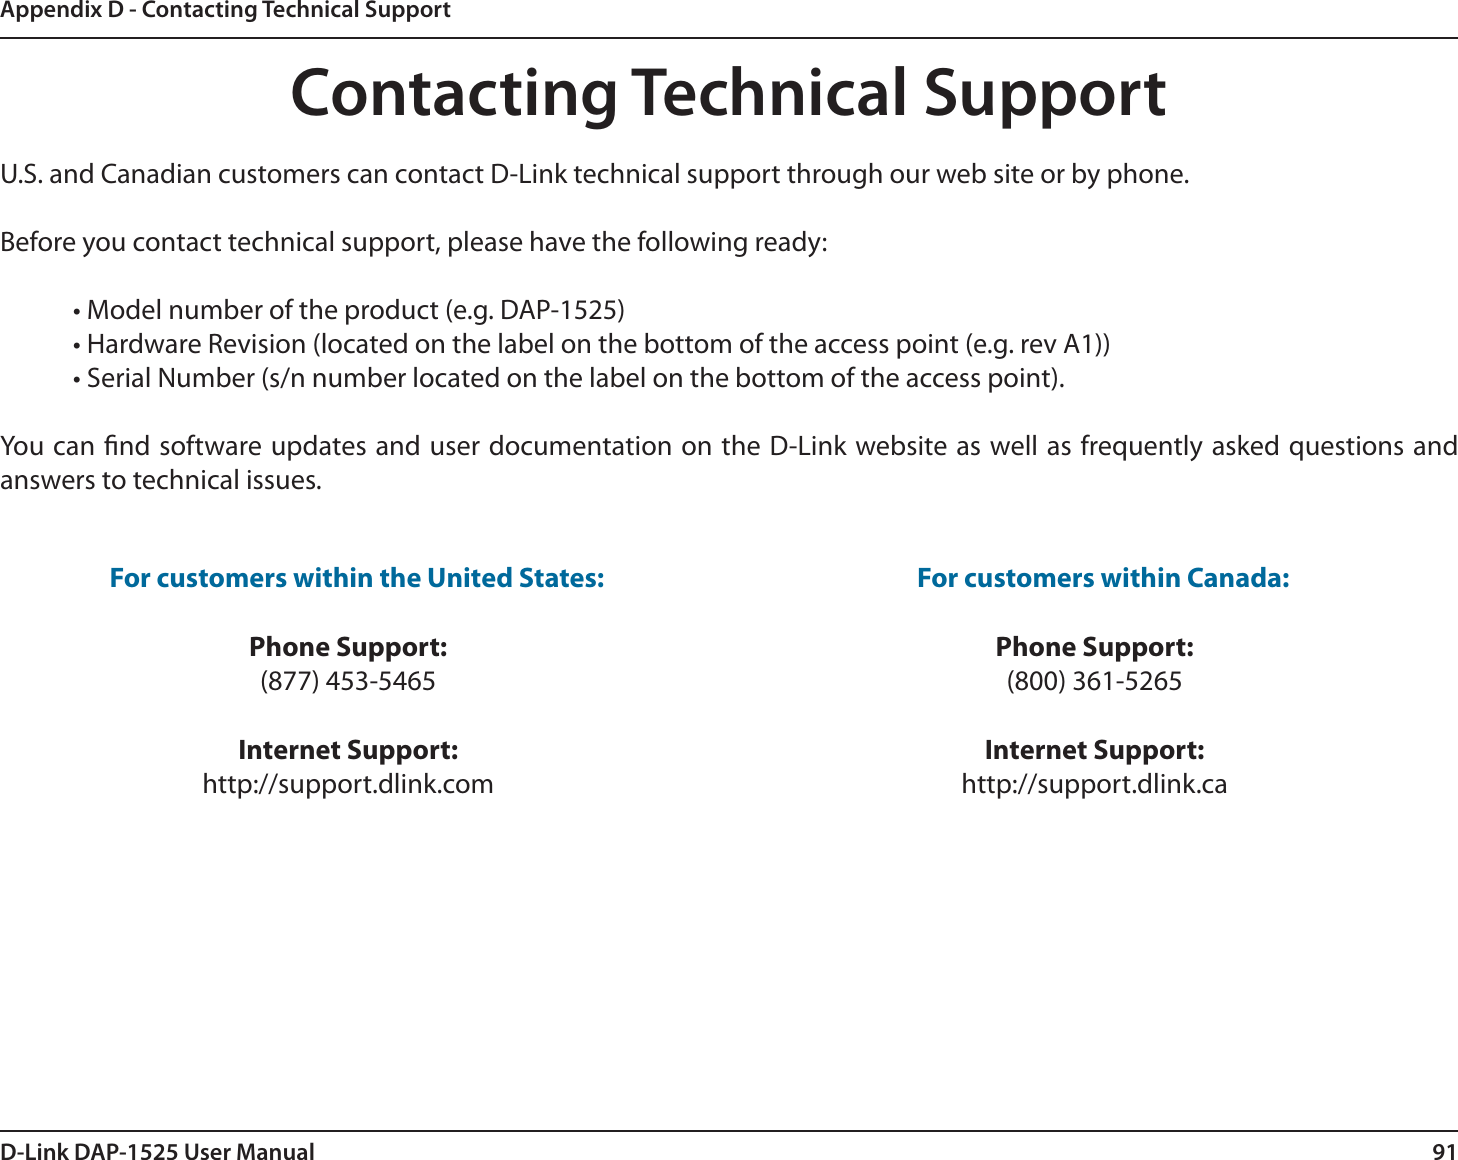 91D-Link DAP-1525 User ManualAppendix D - Contacting Technical SupportContacting Technical SupportU.S. and Canadian customers can contact D-Link technical support through our web site or by phone.Before you contact technical support, please have the following ready:  • Model number of the product (e.g. DAP-1525)  • Hardware Revision (located on the label on the bottom of the access point (e.g. rev A1))  • Serial Number (s/n number located on the label on the bottom of the access point). You can nd software updates and user documentation on the D-Link website as well as frequently asked questions and answers to technical issues.For customers within the United States: Phone Support:(877) 453-5465Internet Support:http://support.dlink.com For customers within Canada: Phone Support:(800) 361-5265 Internet Support:http://support.dlink.ca